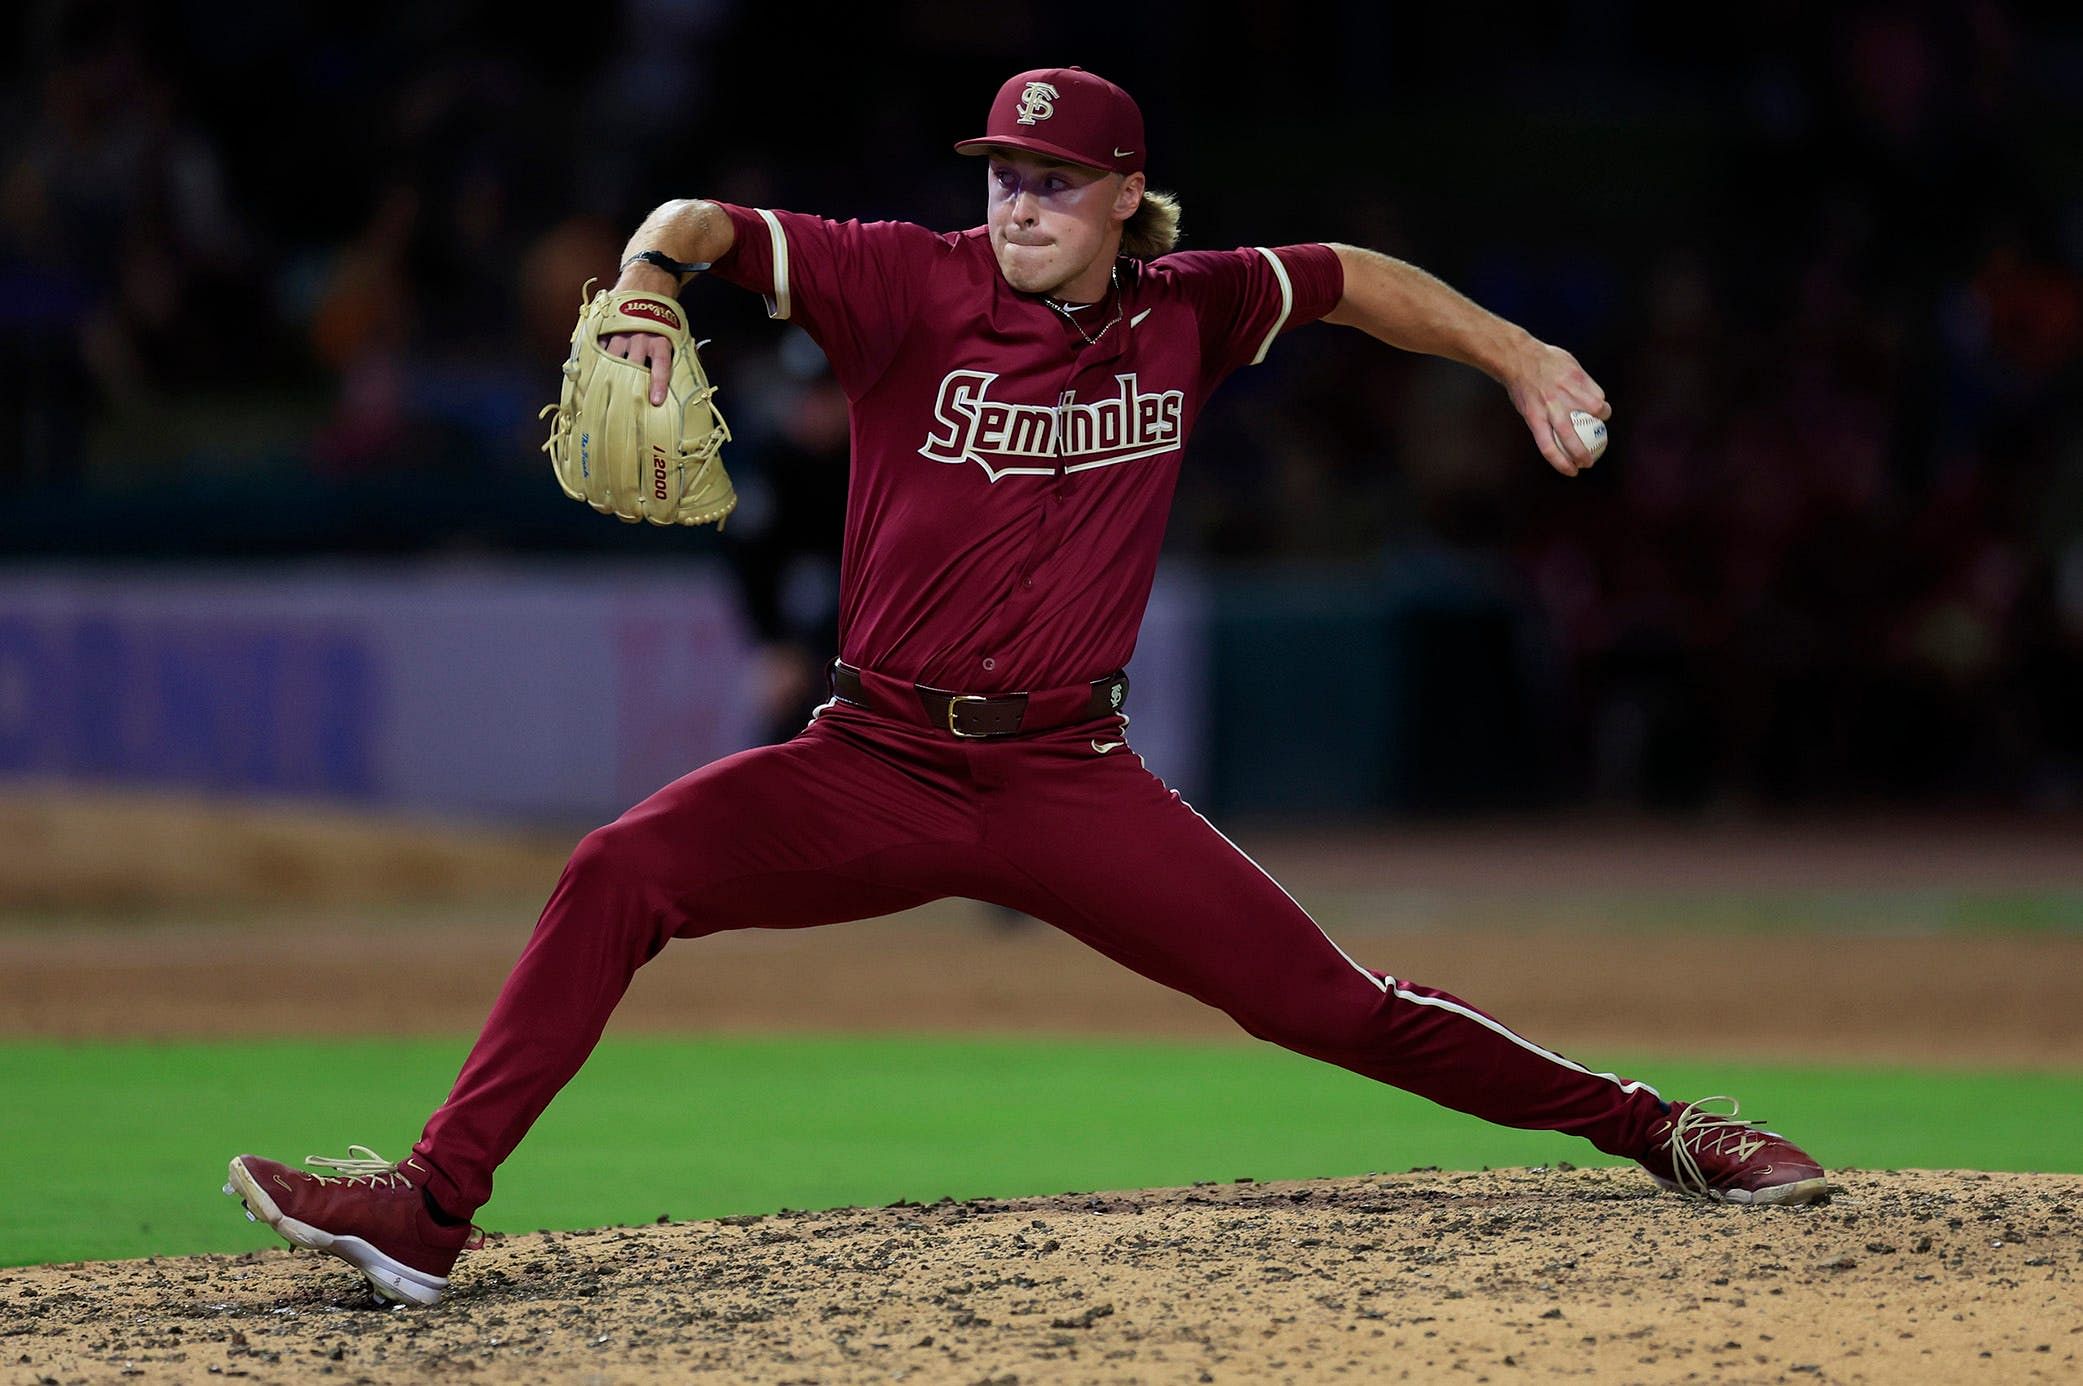 Florida State needs a big week in the ACC Tournament to stay in possible college baseball super regional hosting discussions.